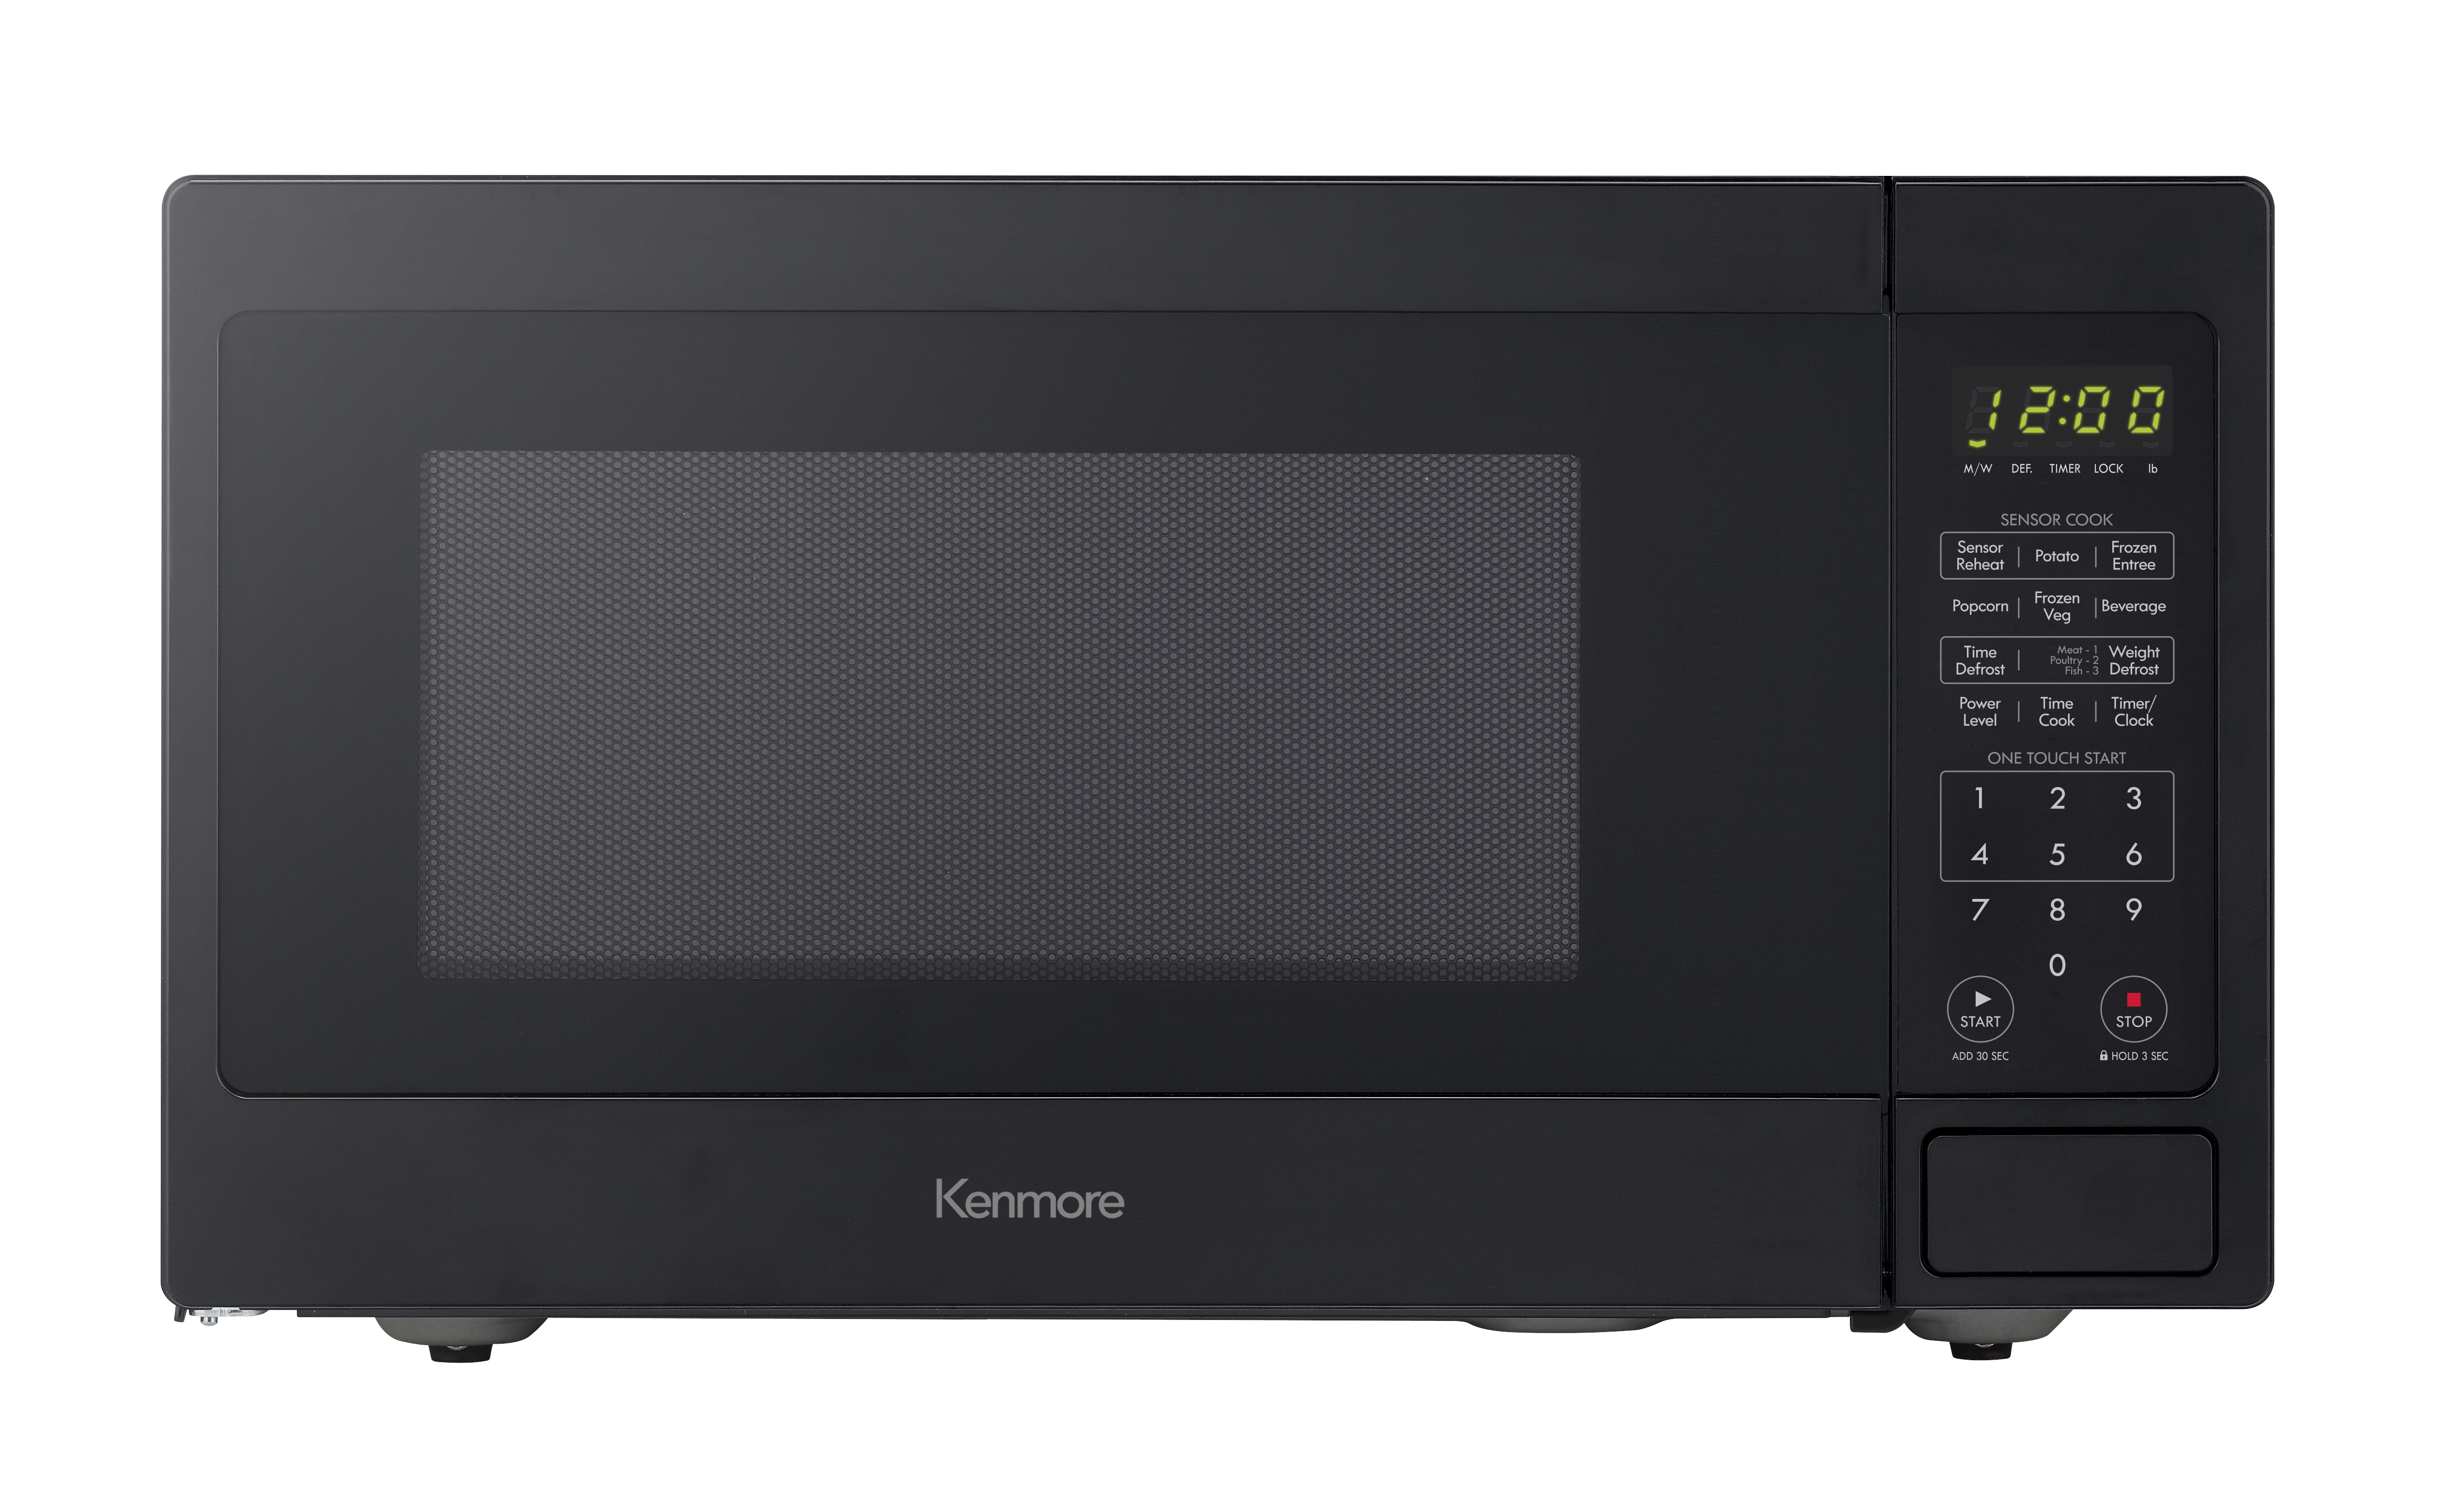 Kenmore 71319 1.3 cu. ft. Countertop Microwave Oven - Black | Shop Your